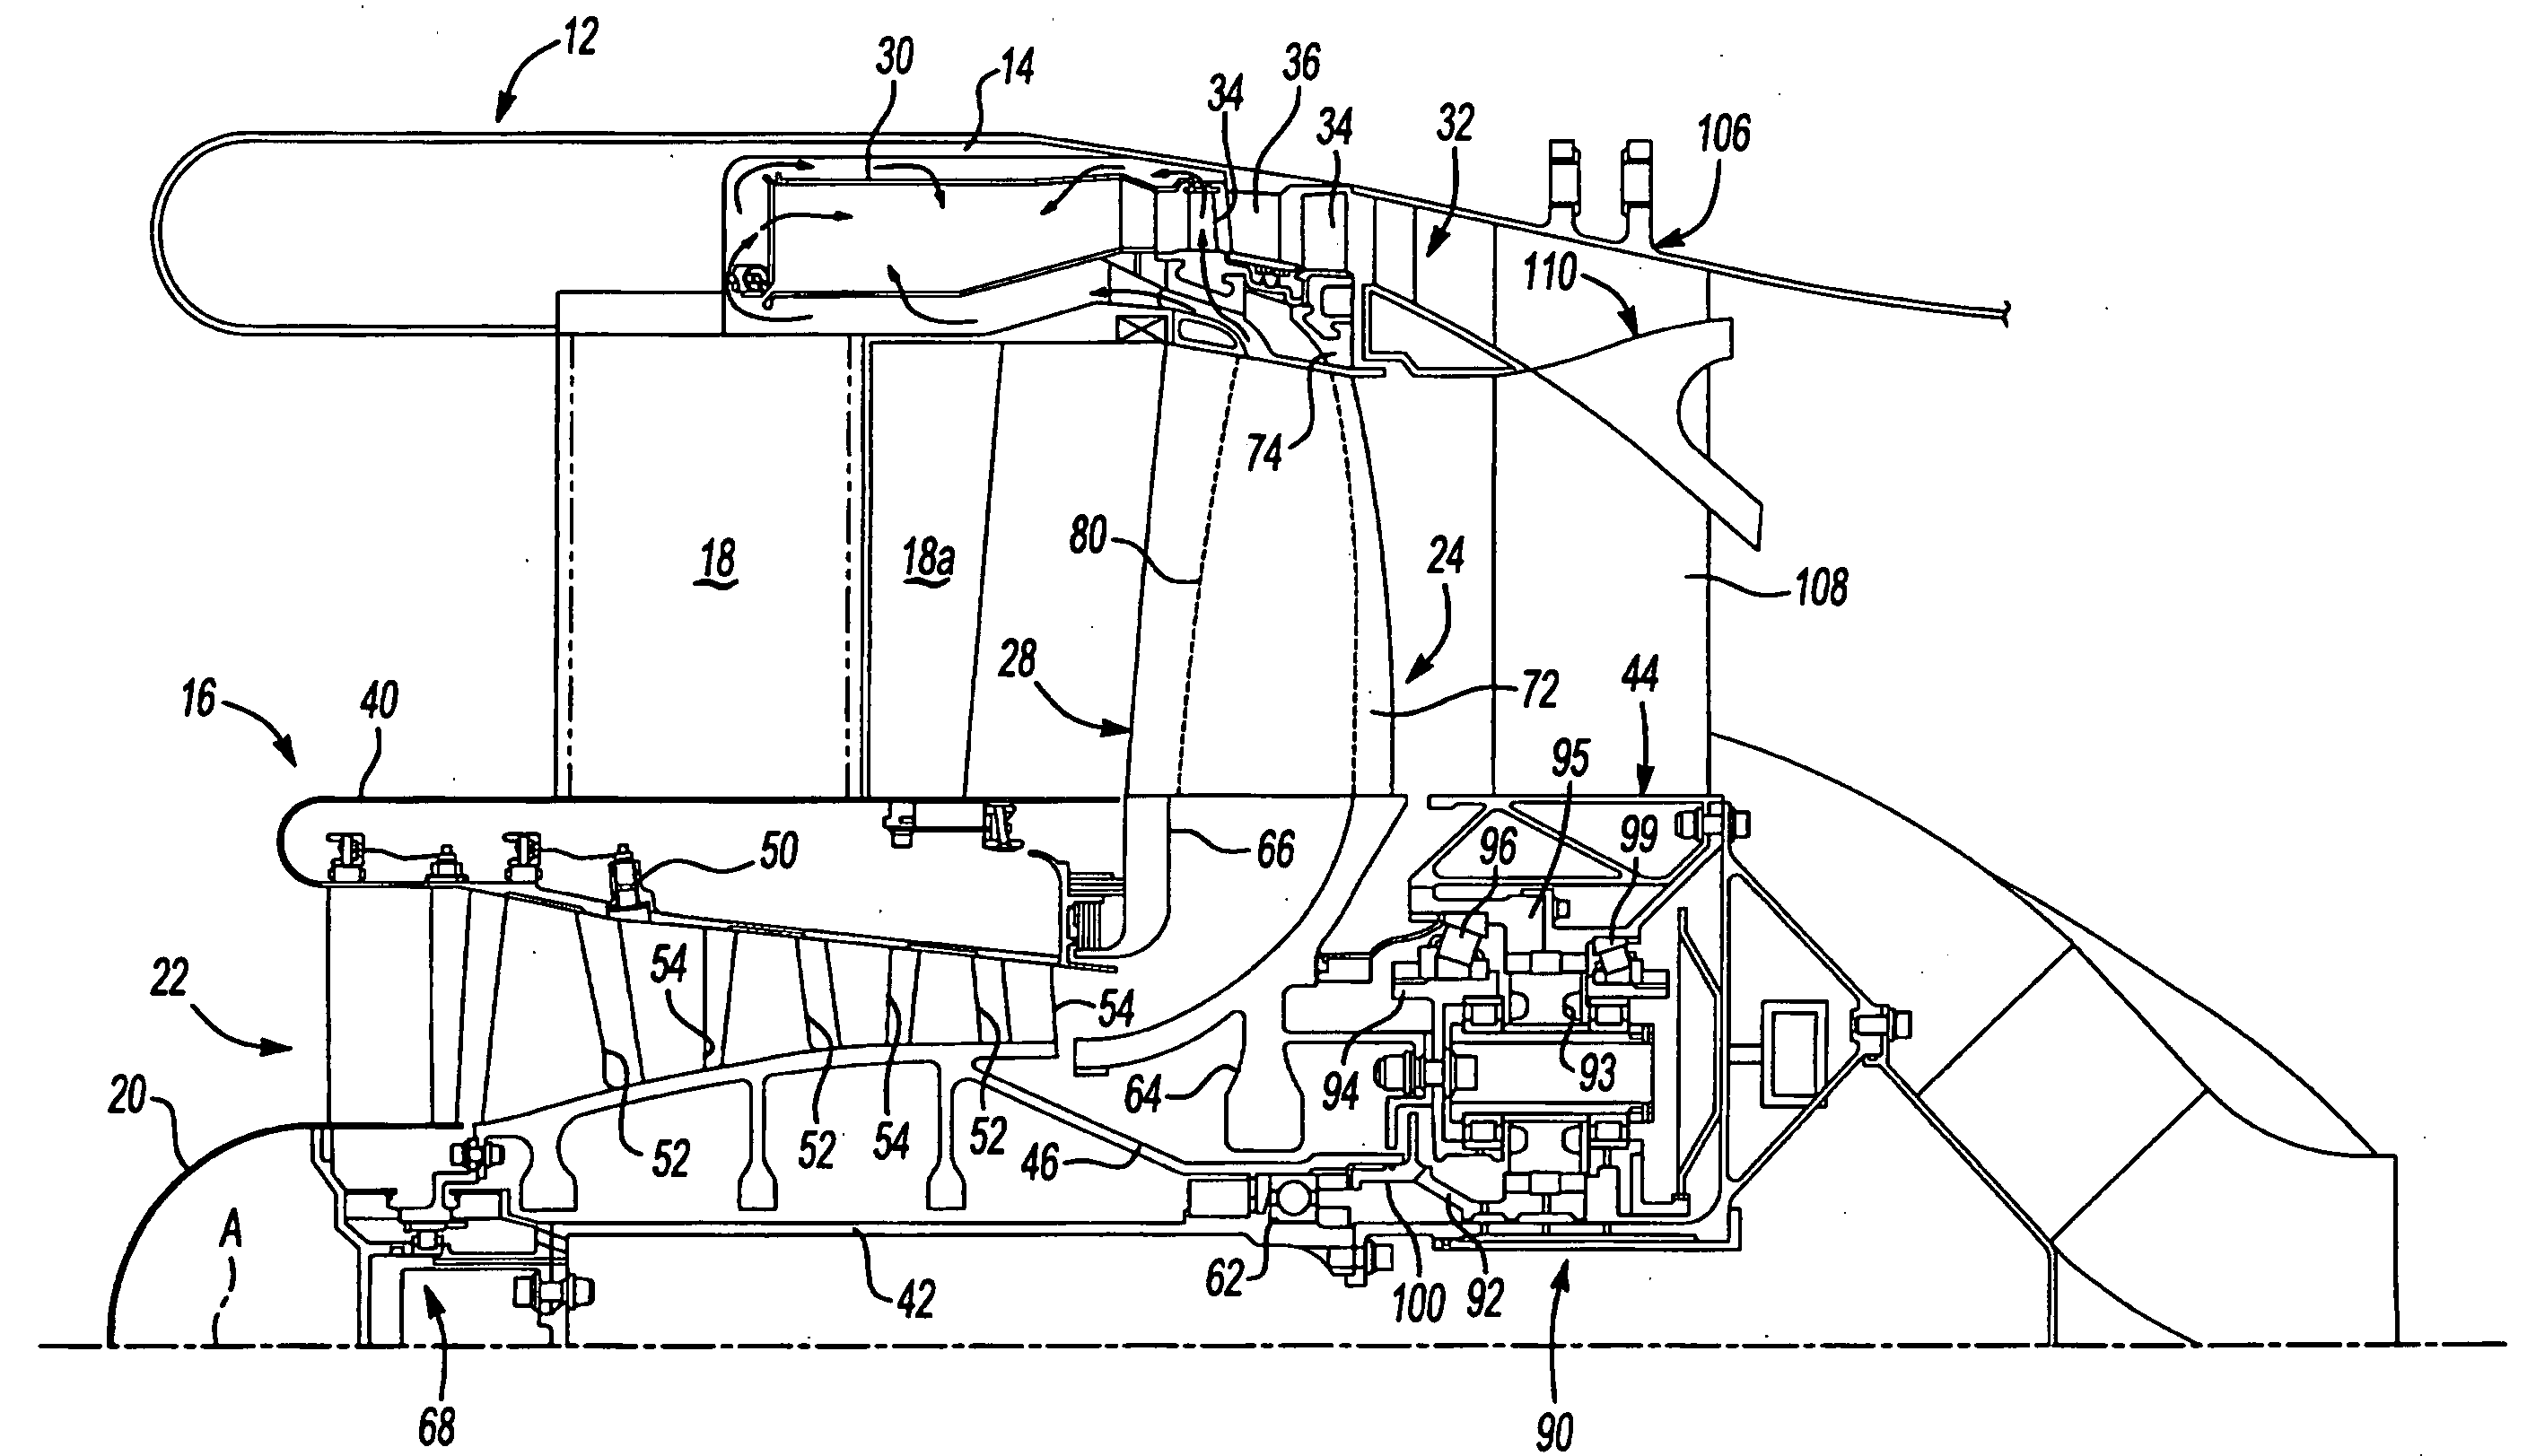 Axial compressor for tip turbine engine